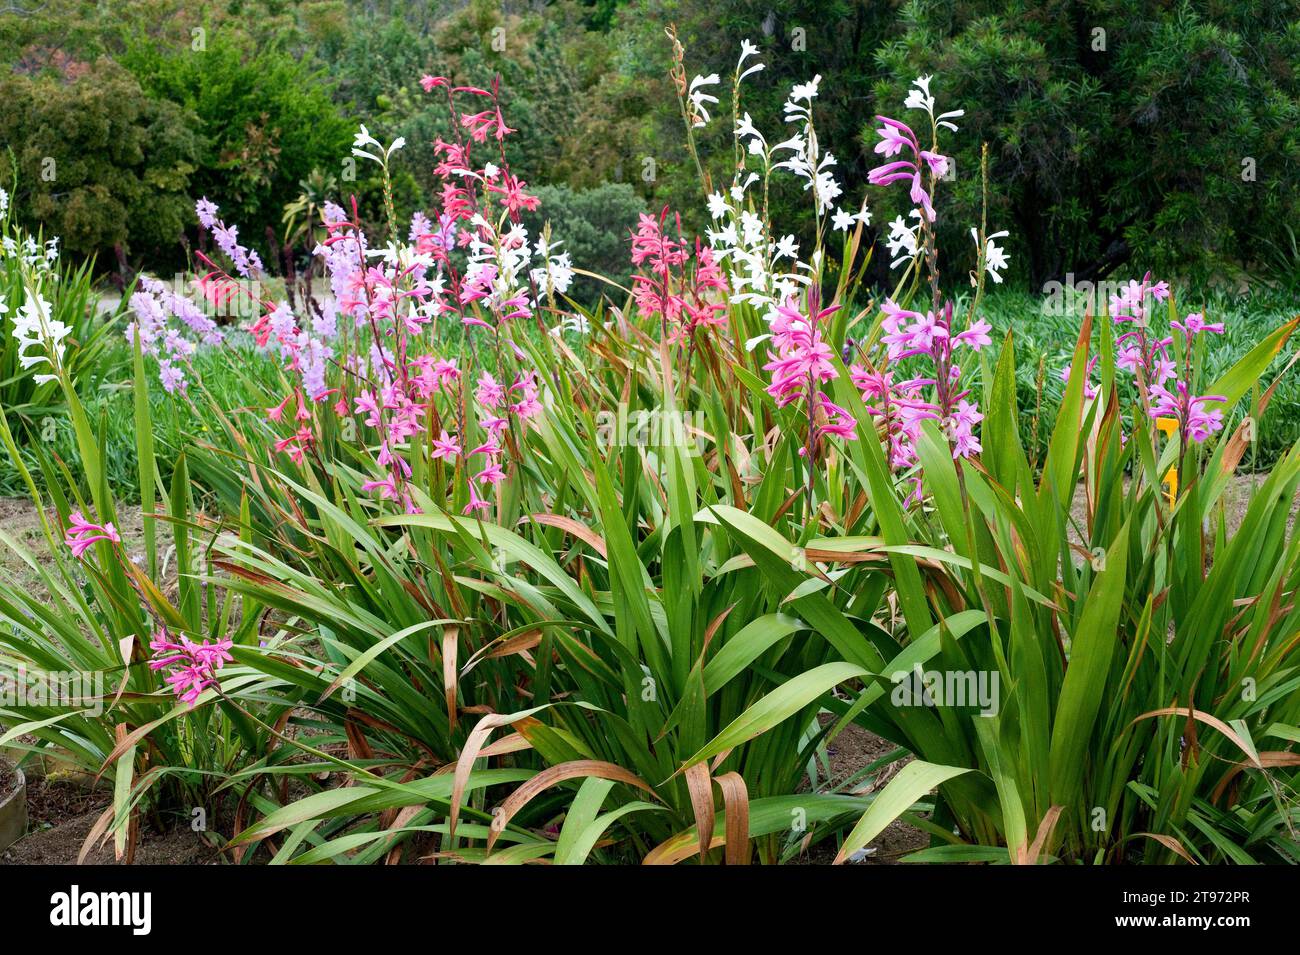 Fragrant bugle lily (Watsonia marginata) is an ornamental plant native to South Africa. Stock Photo